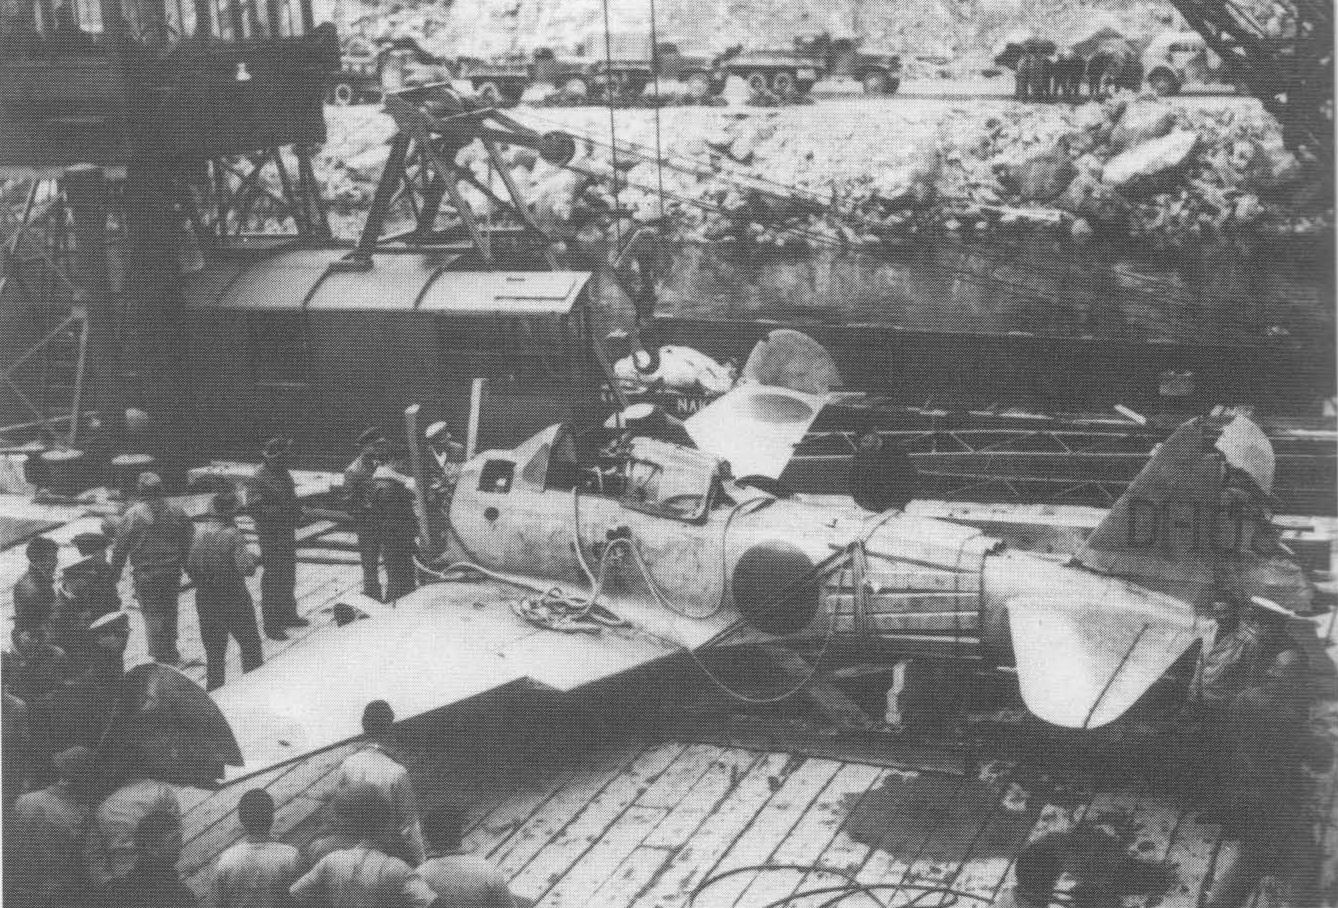 Captured A6M Zero fighter 'Akutan Zero' being loaded onto a ship bound for the continental United States, US Territory of Alaska, Jul 1942